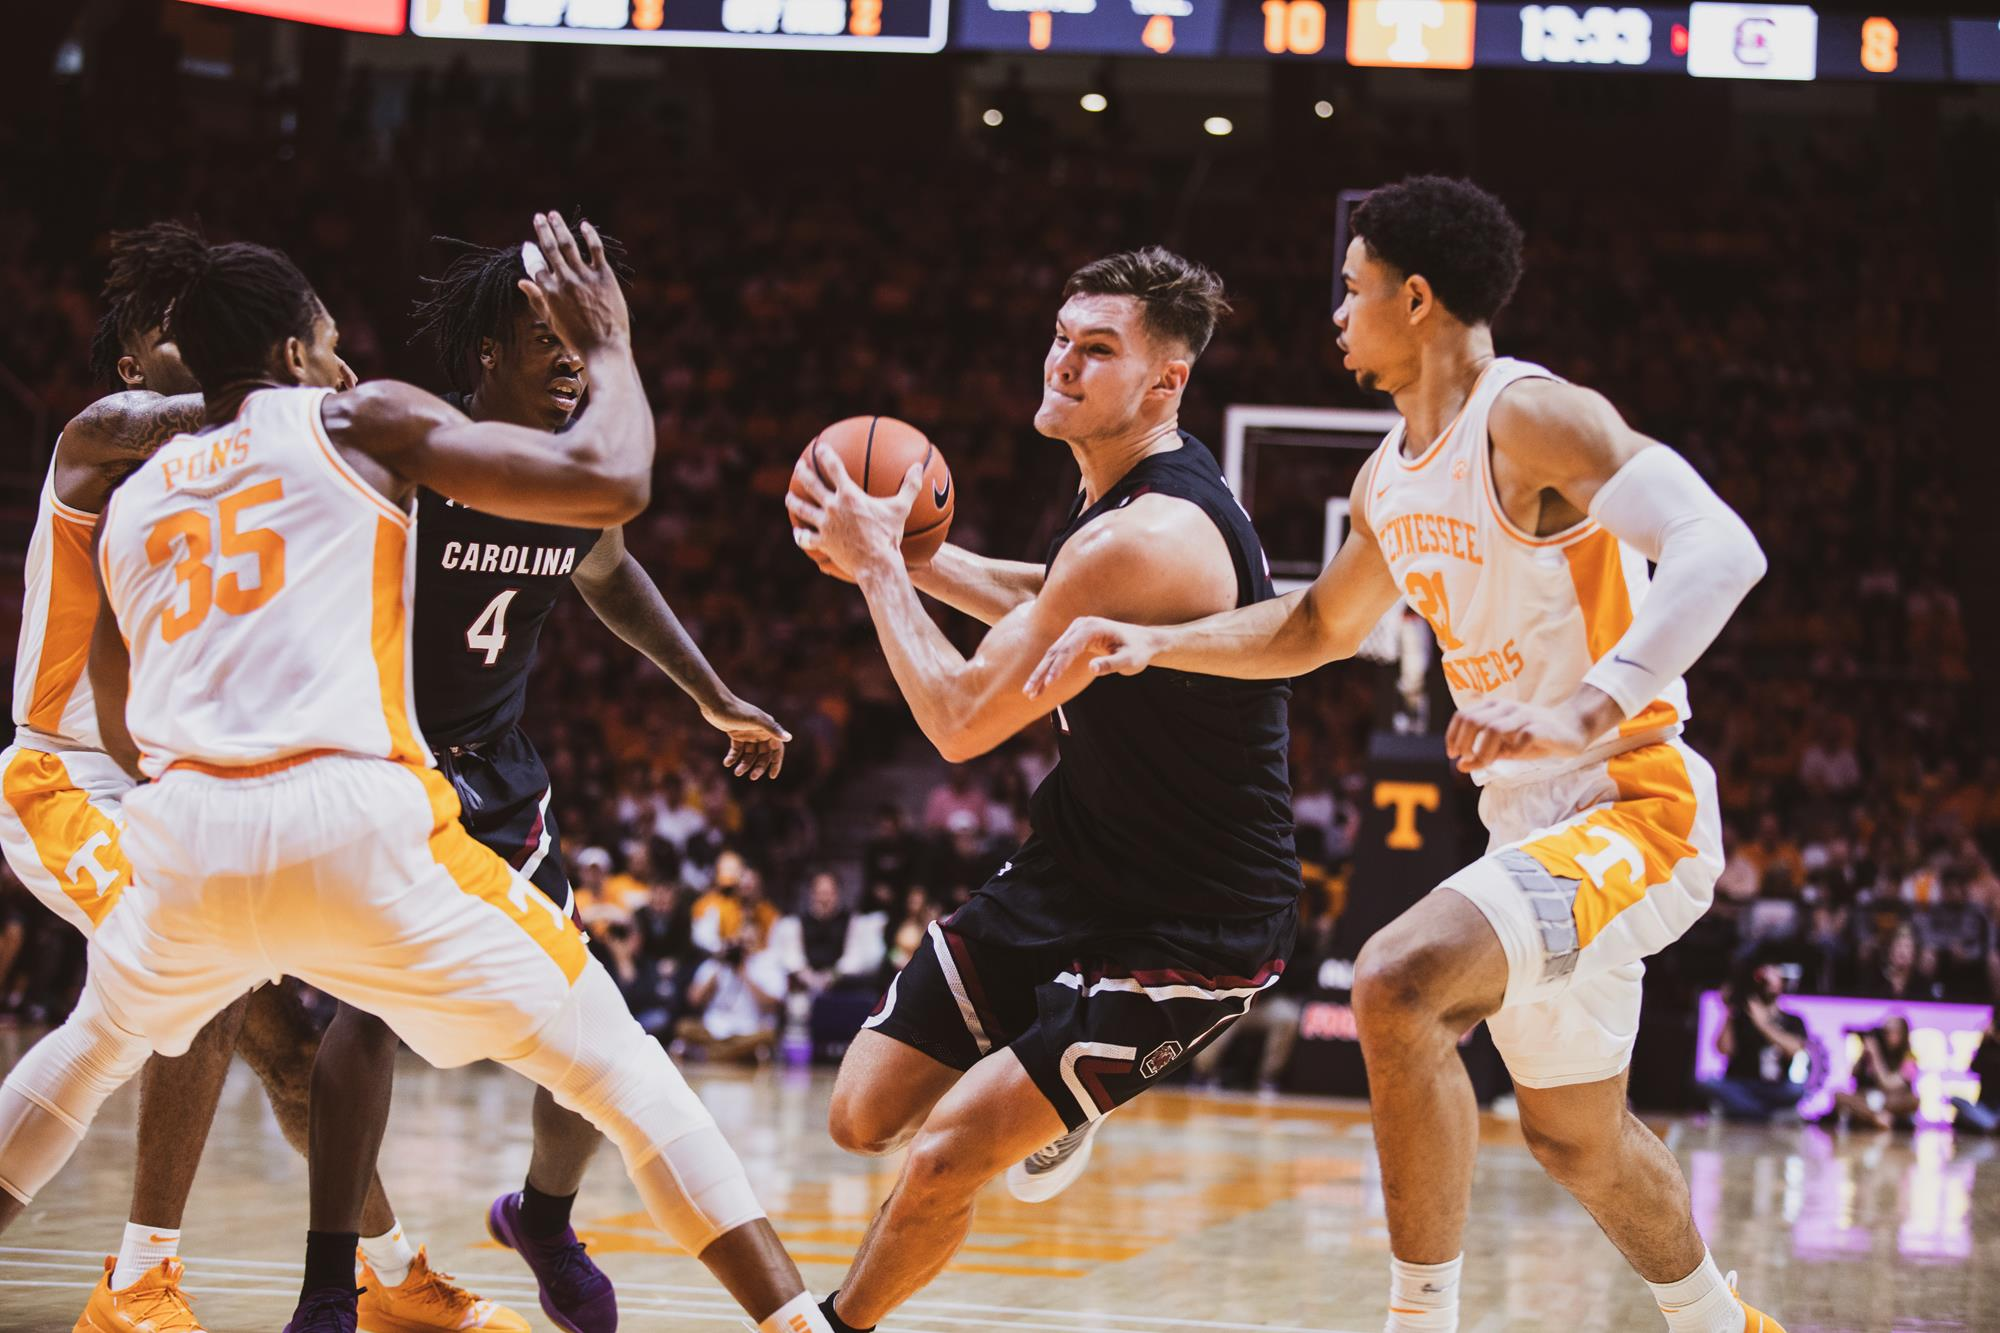 Tennessee ekes out 56-55 victory over South Carolina